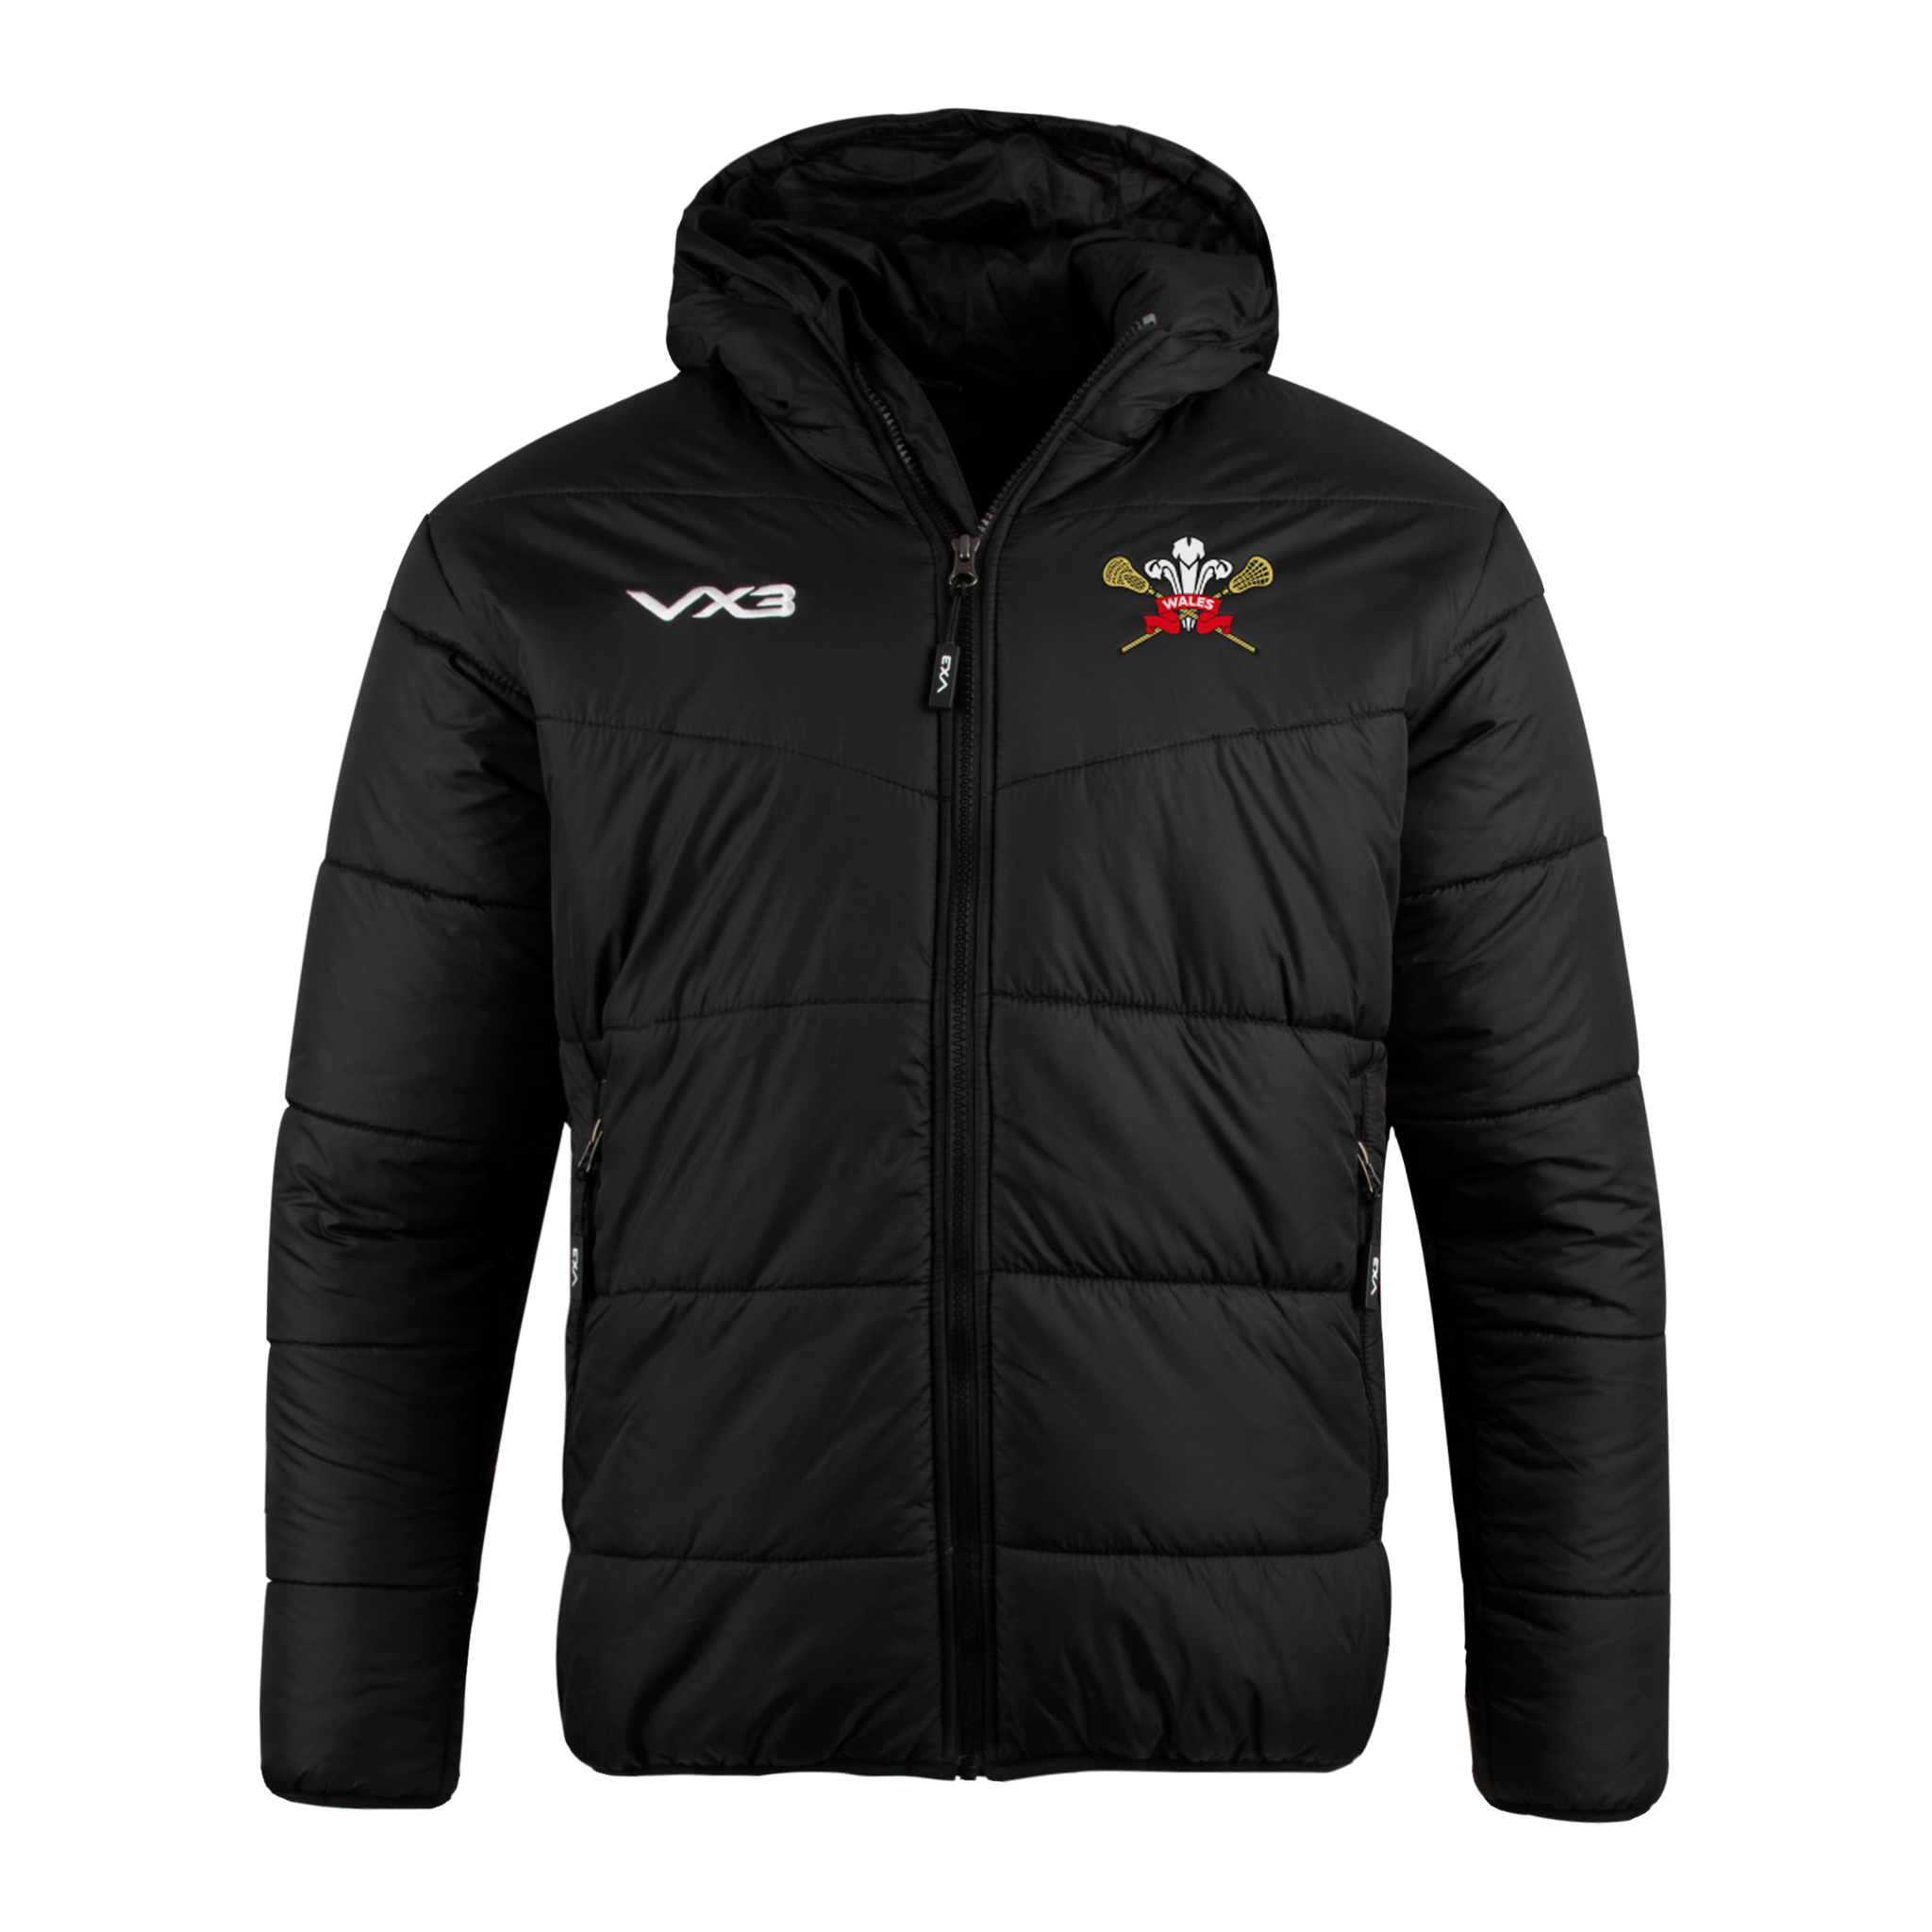 Wales Lacrosse Lorica Quilted Jacket